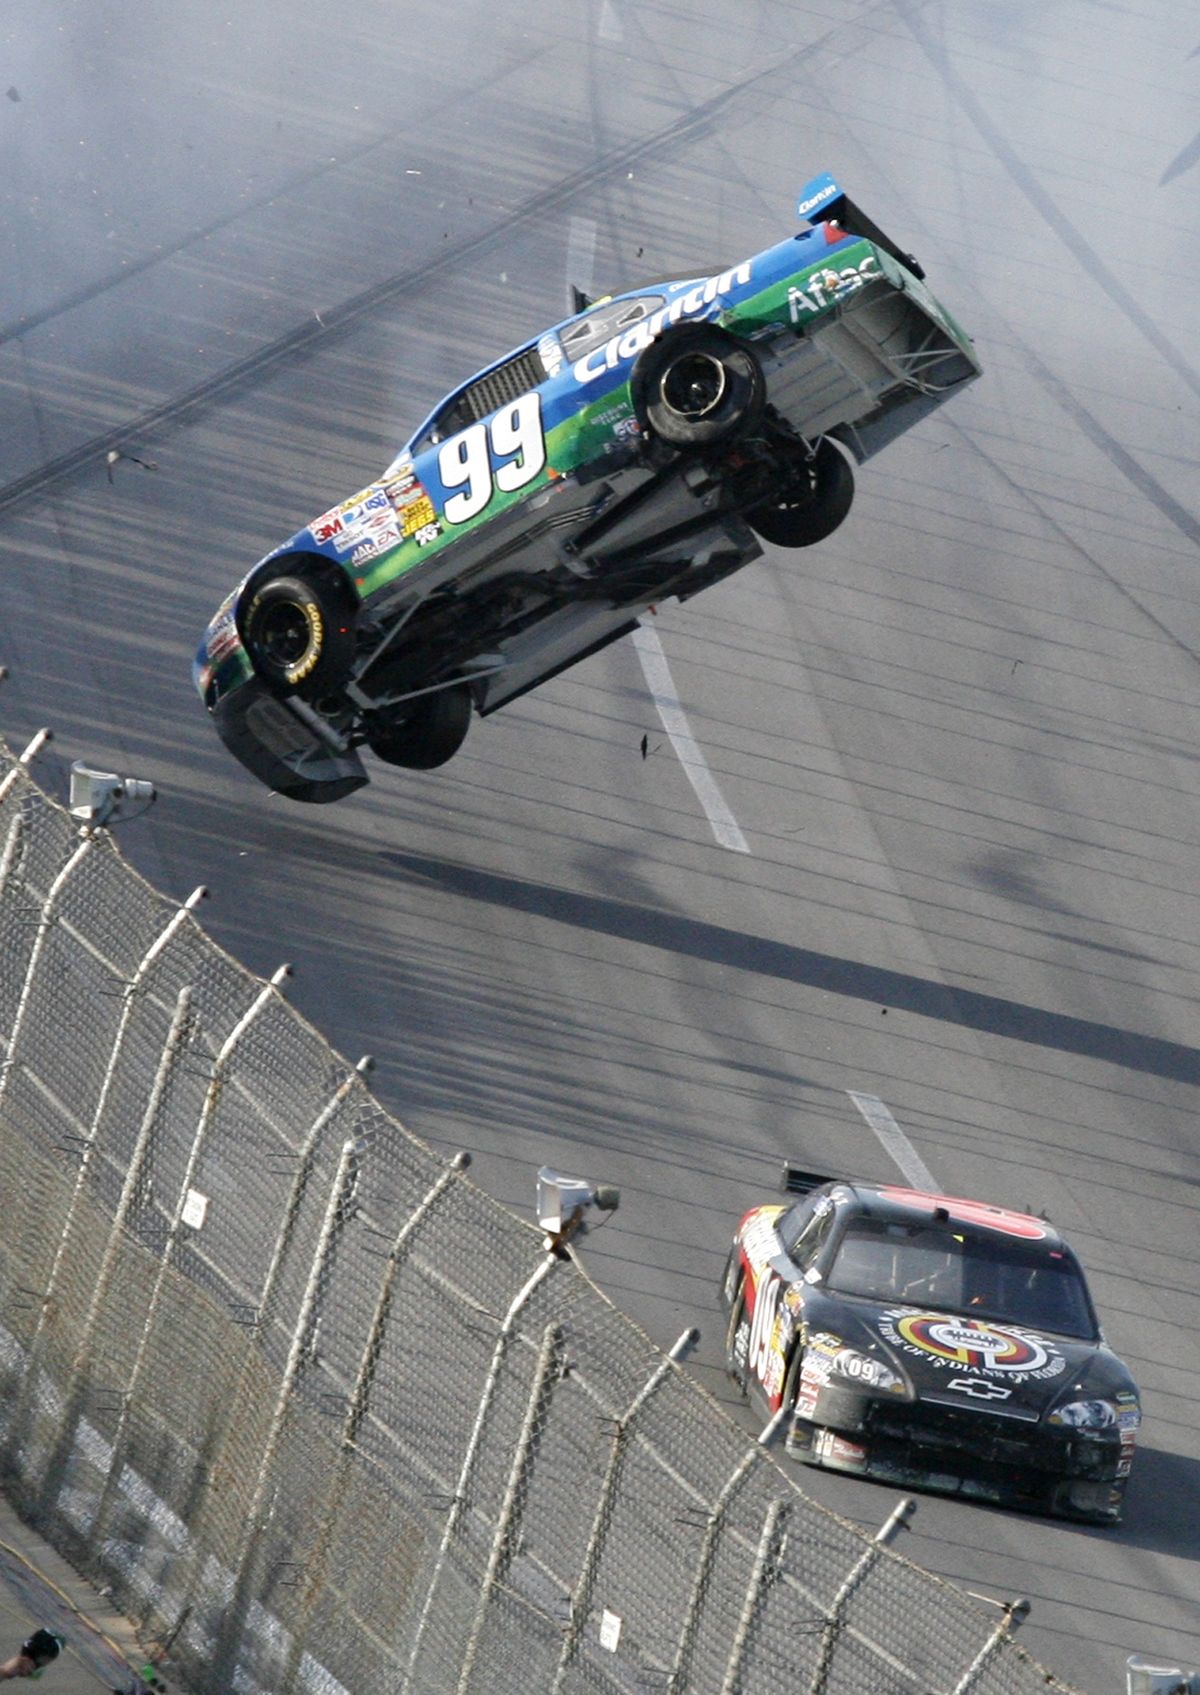 Carl Edwards’ car goes airborne after colliding with the car of Brad Keselowski, right. (Associated Press / The Spokesman-Review)